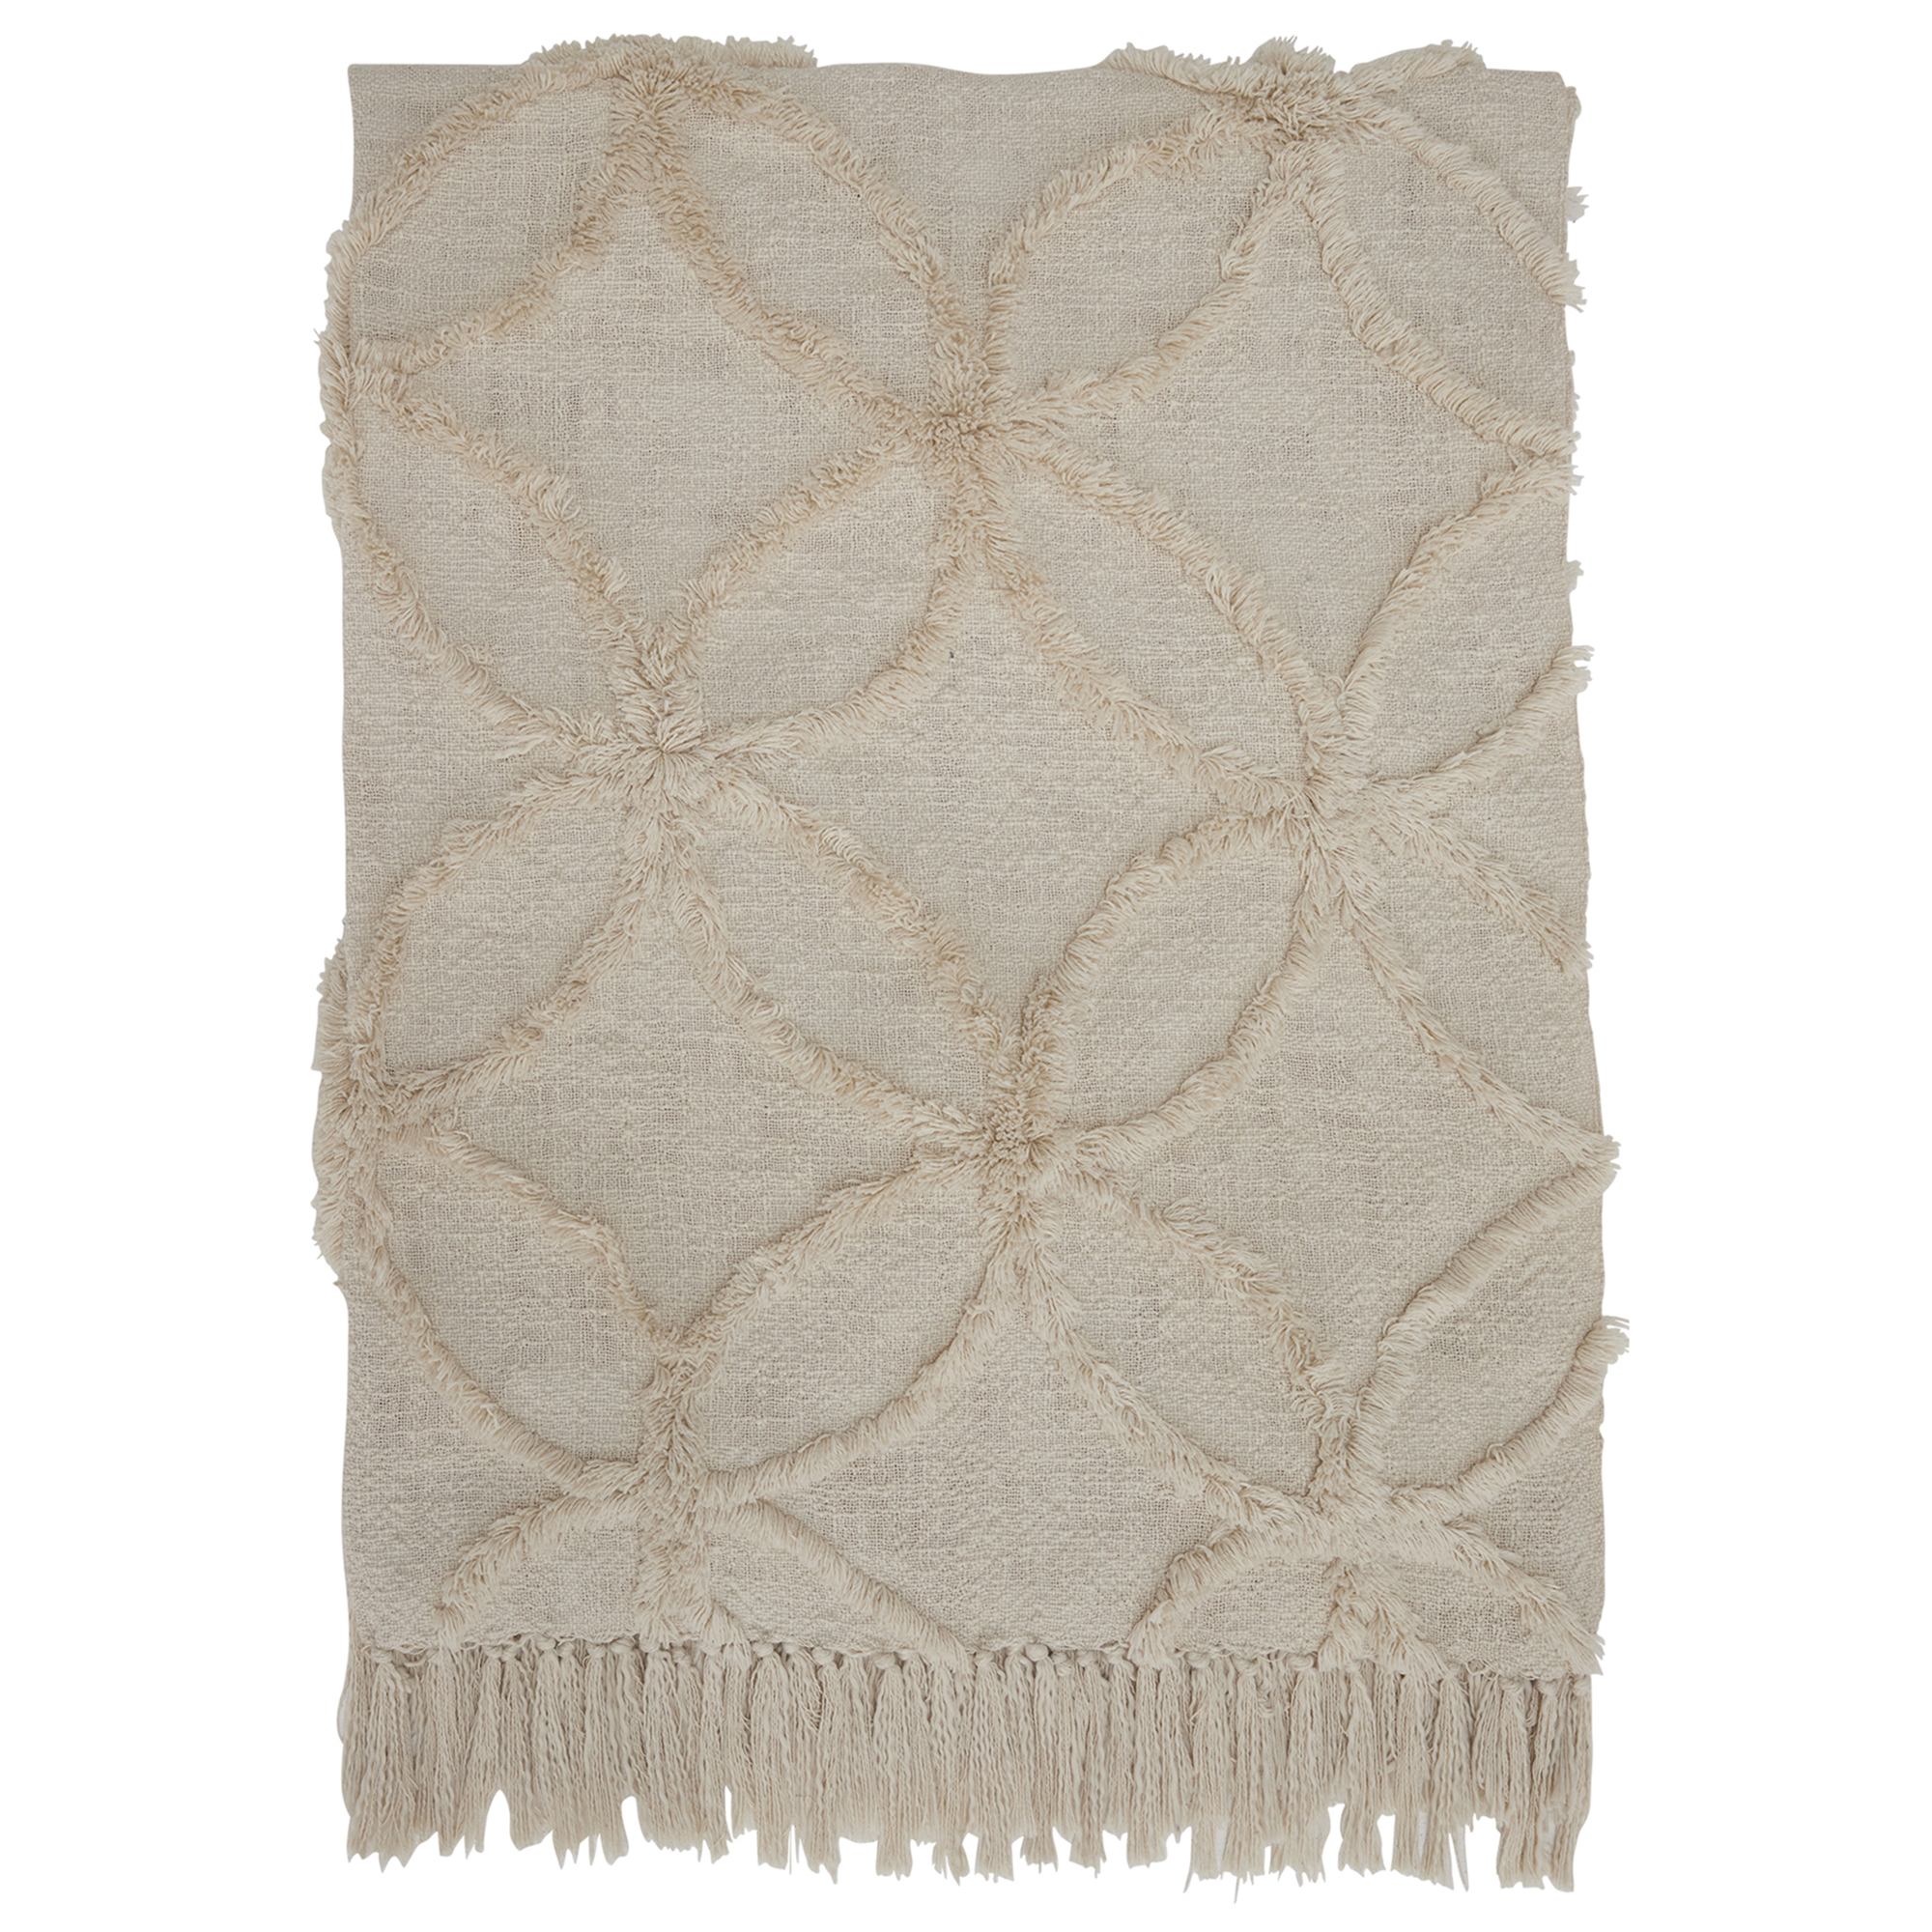 Flora Cream Recycled Plastic Throw Blanket | Barker & Stonehouse